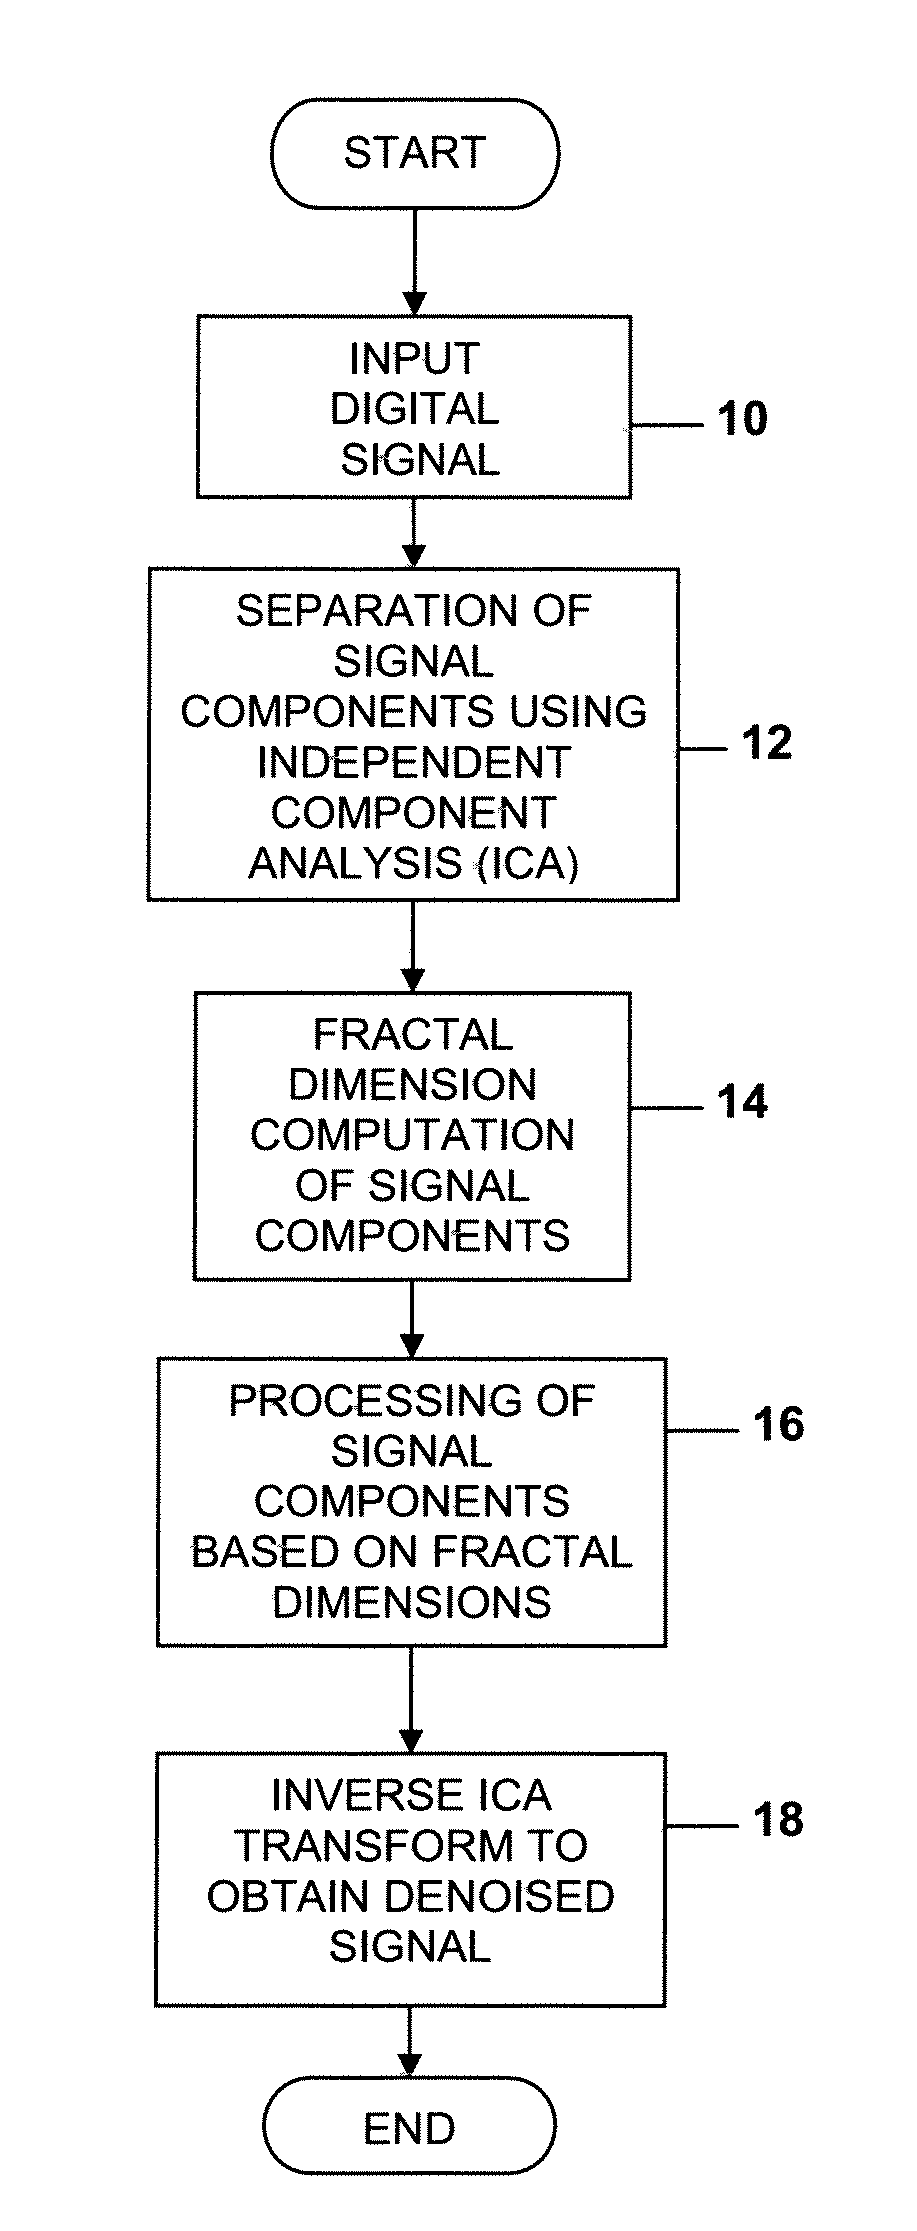 System and Method For Signal Denoising Using Independent Component Analysis and Fractal Dimension Estimation